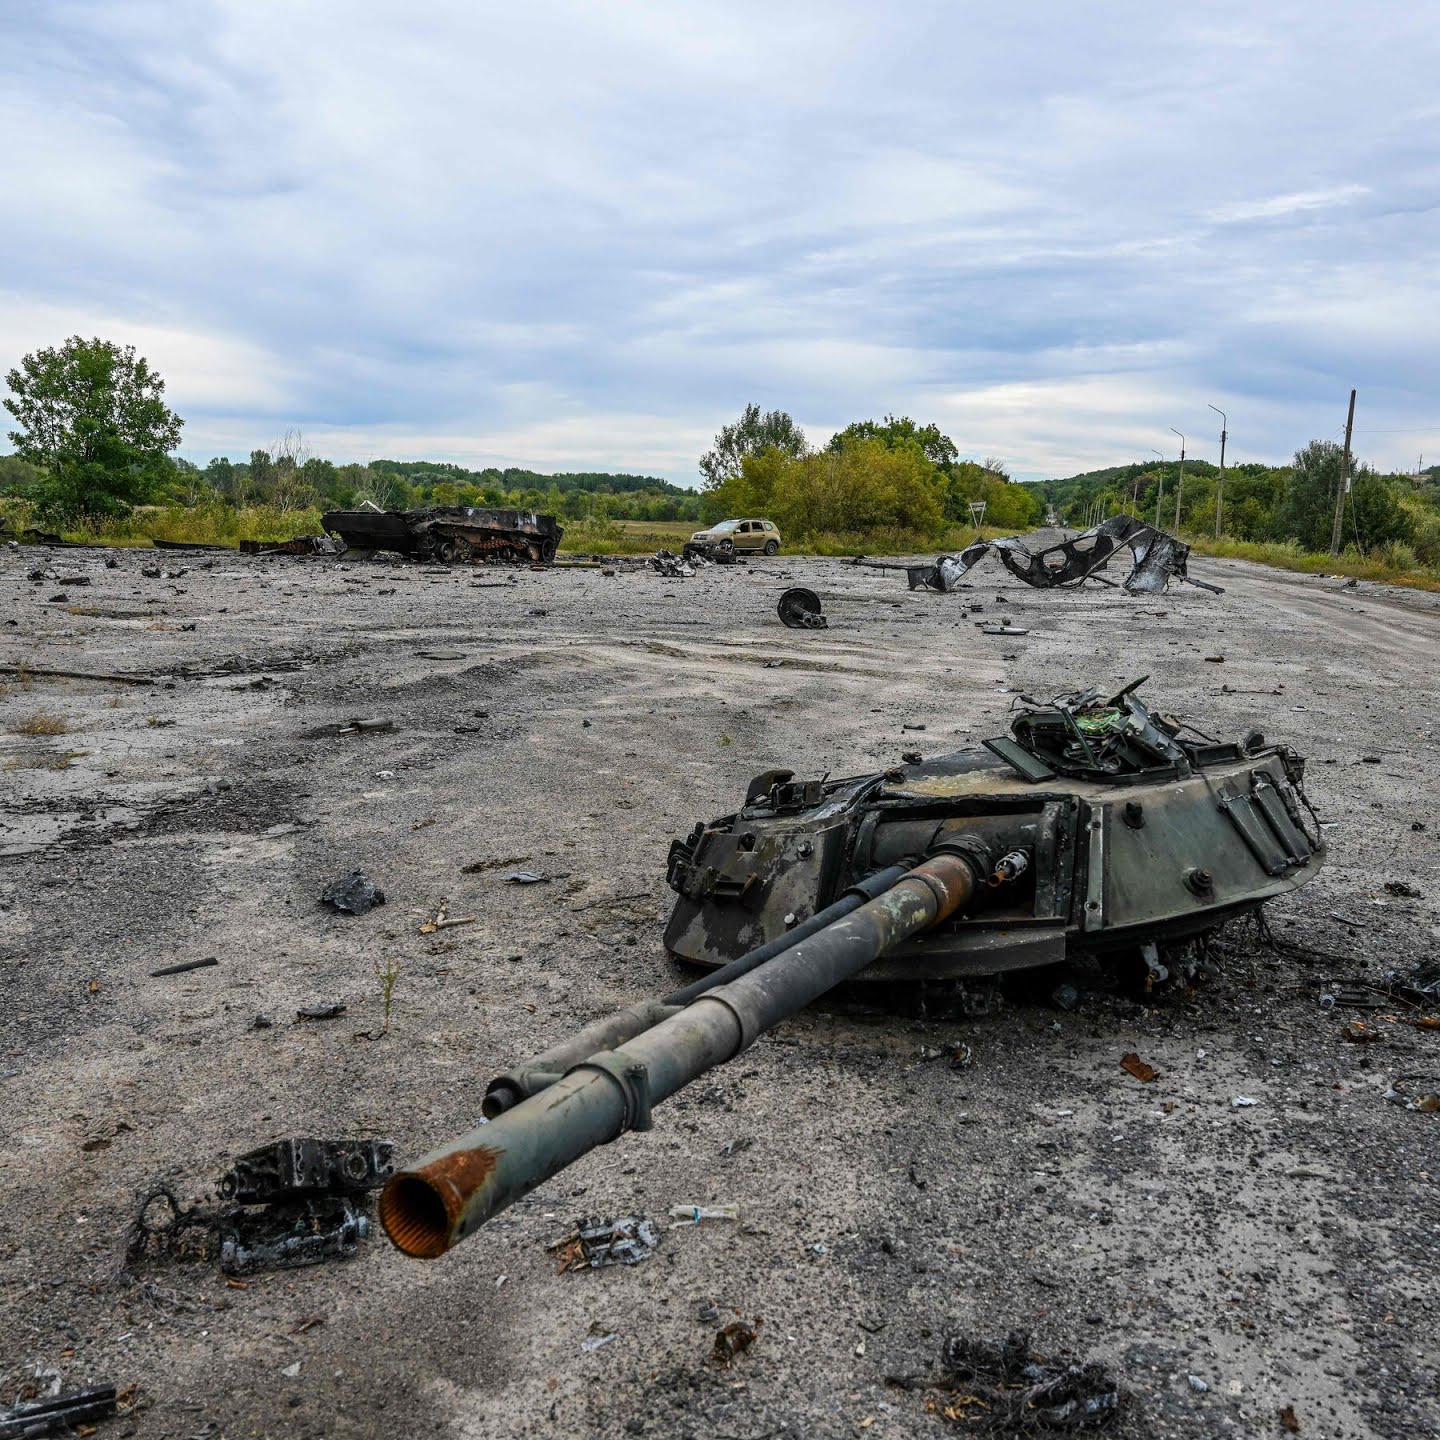 The scene in the Kharkiv region this weekend after Russian forces retreated.